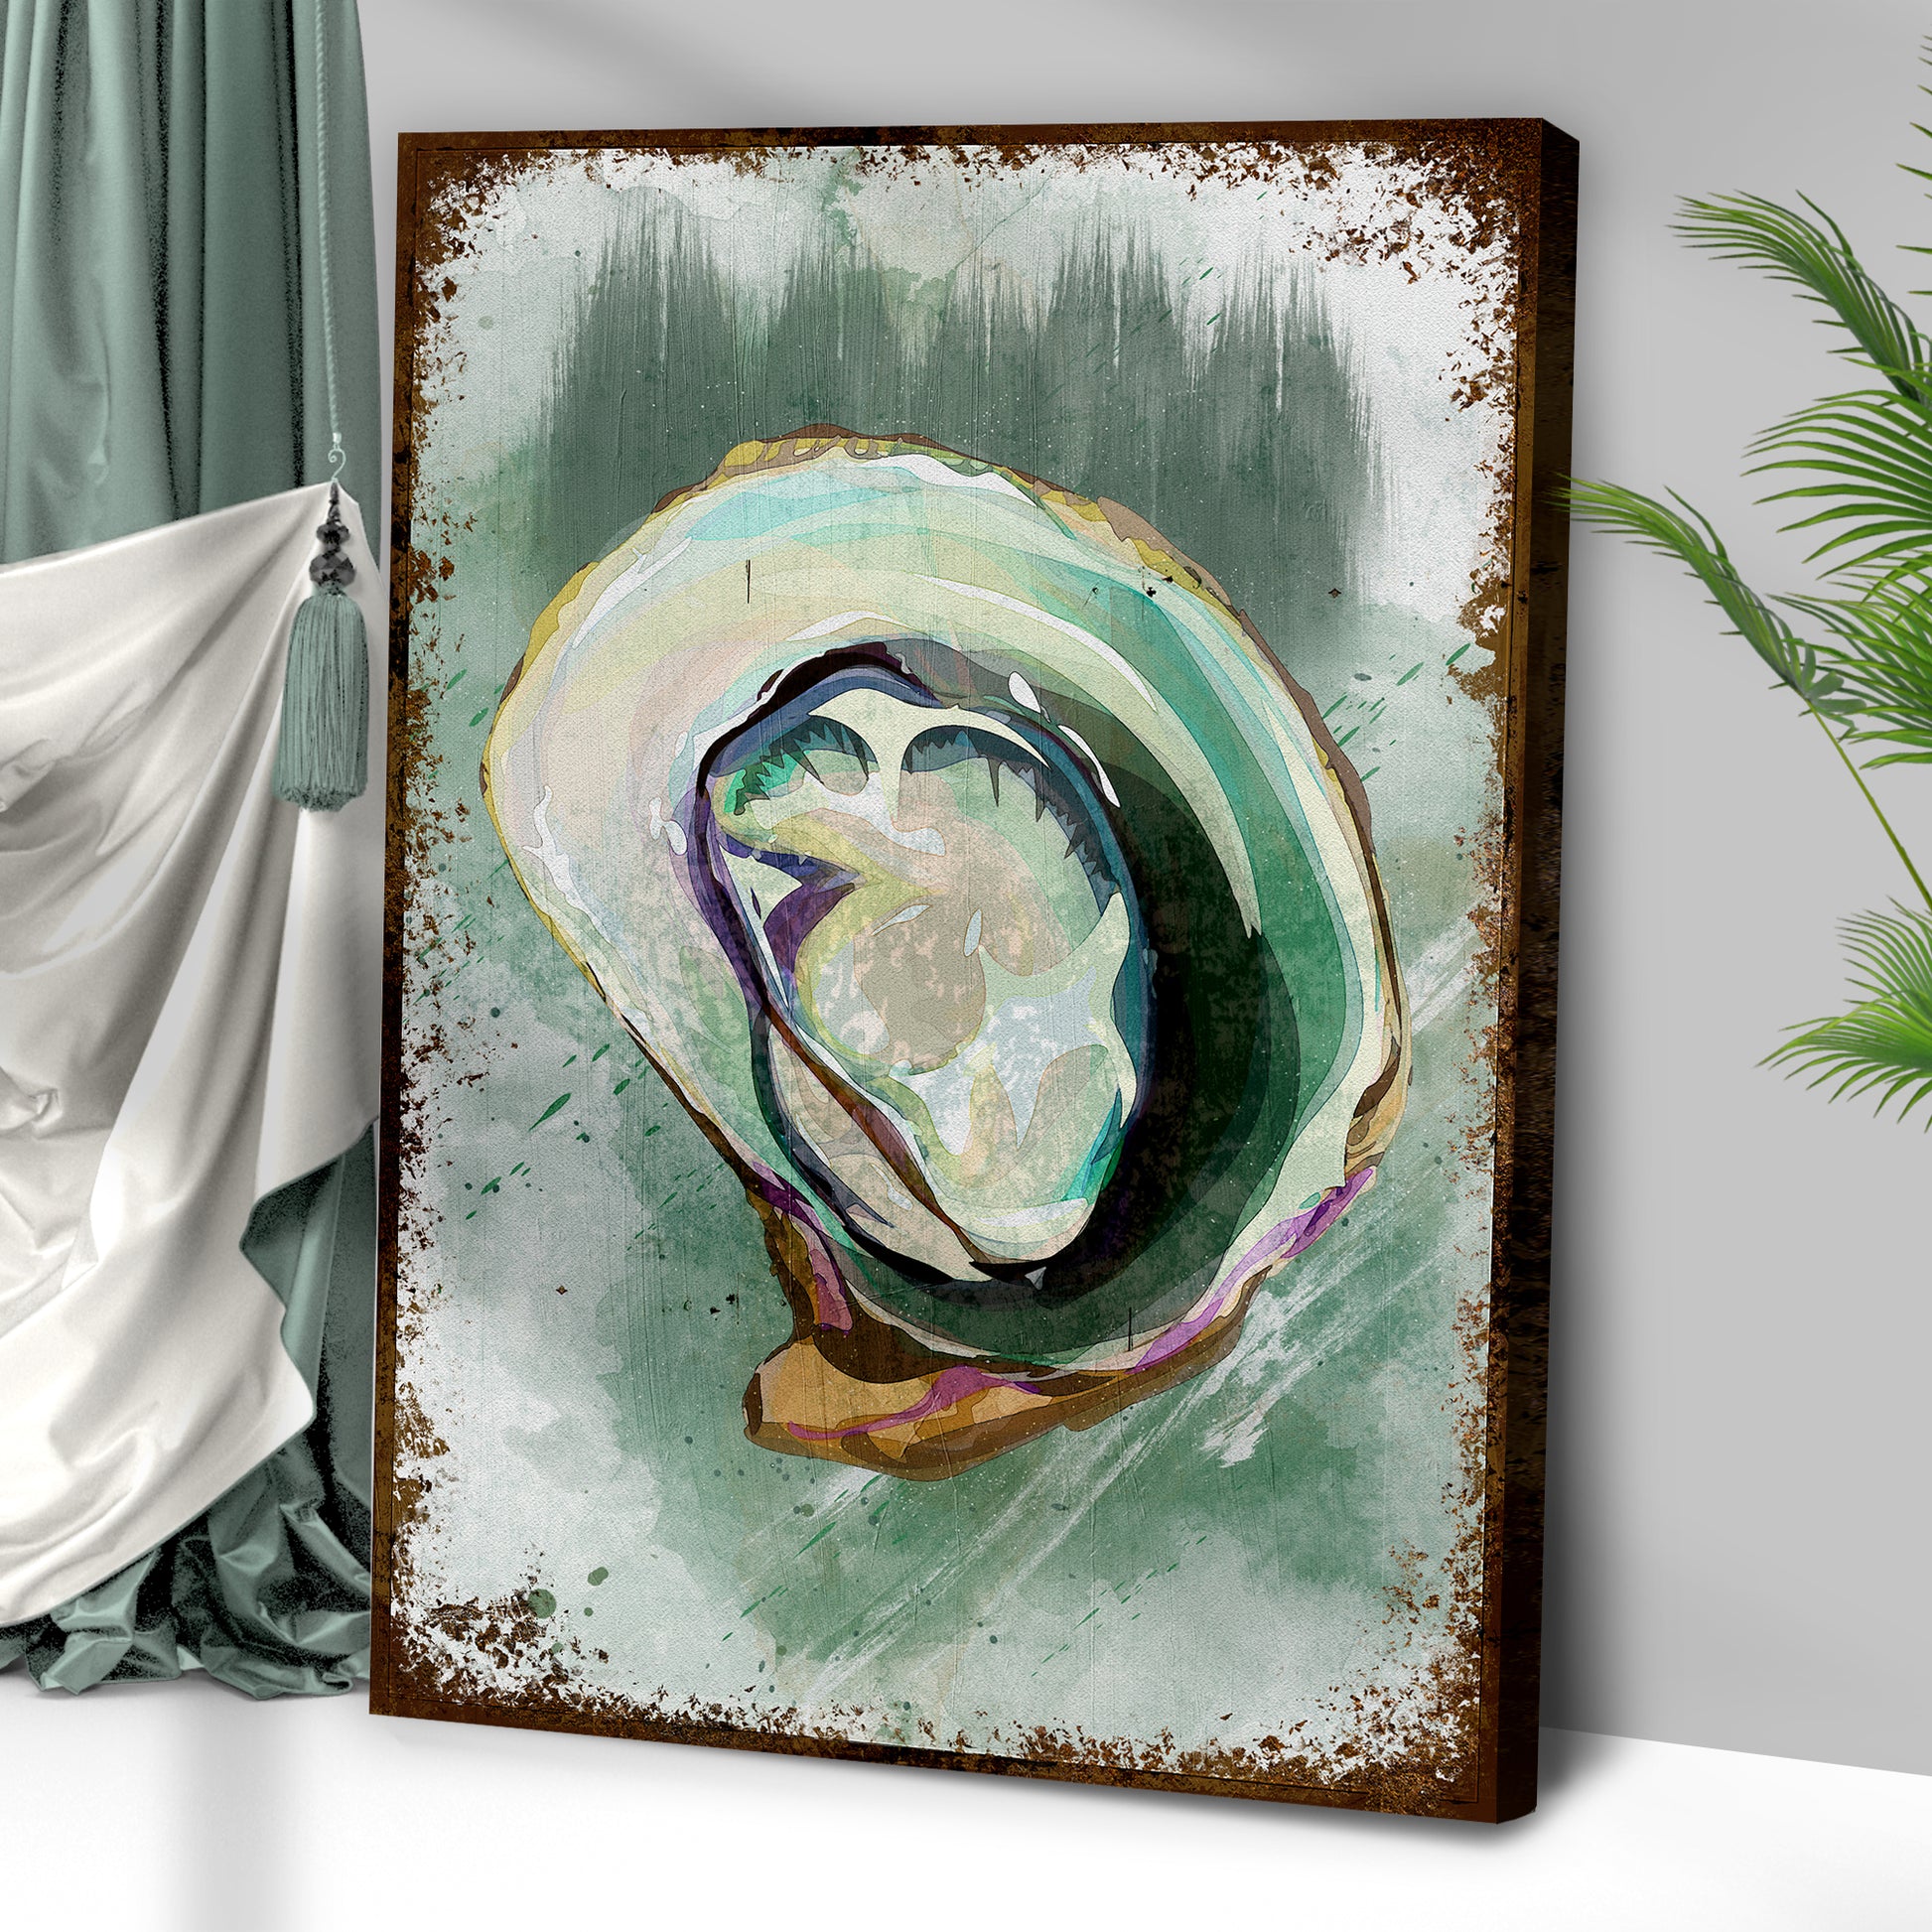 Oyster Shell Abstract Portrait Canvas Wall Art Style 2 - Image by Tailored Canvases